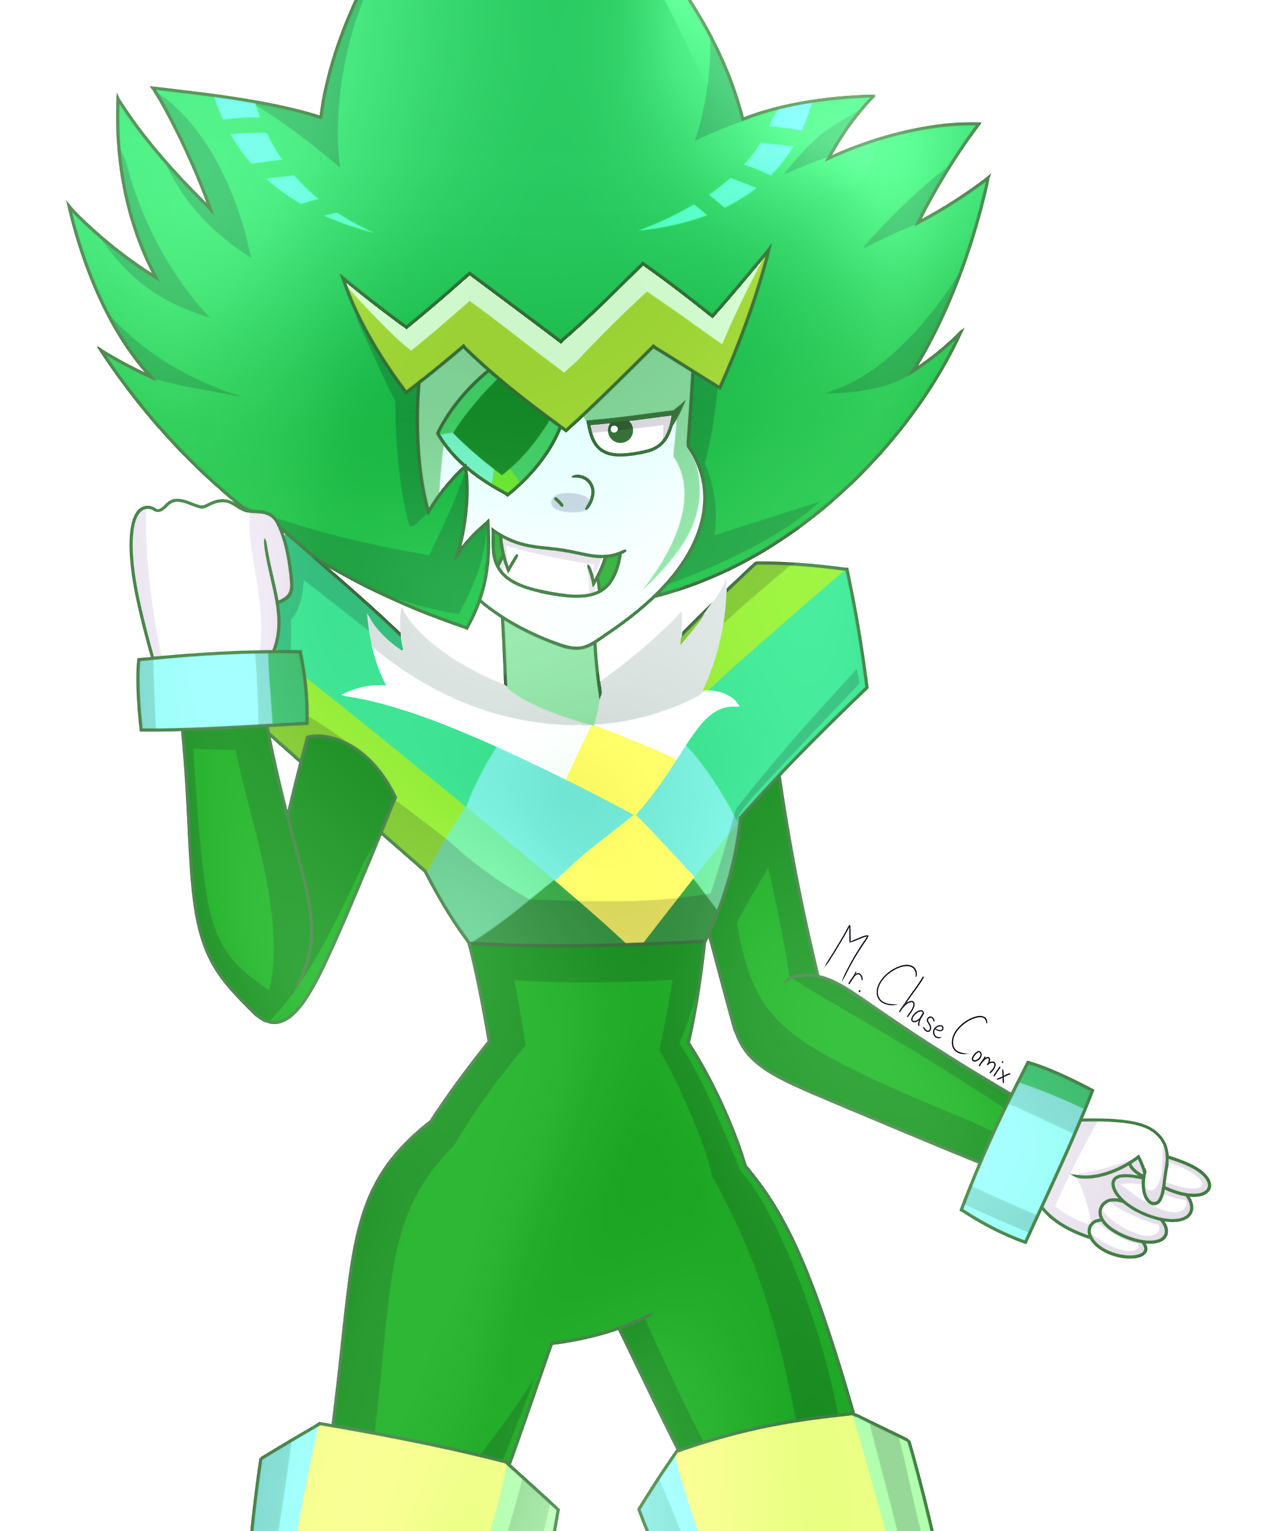 Emerald (Lars of the Stars) Here’s some more Emerald because I’ve haven’t drawn safe art of her yet.